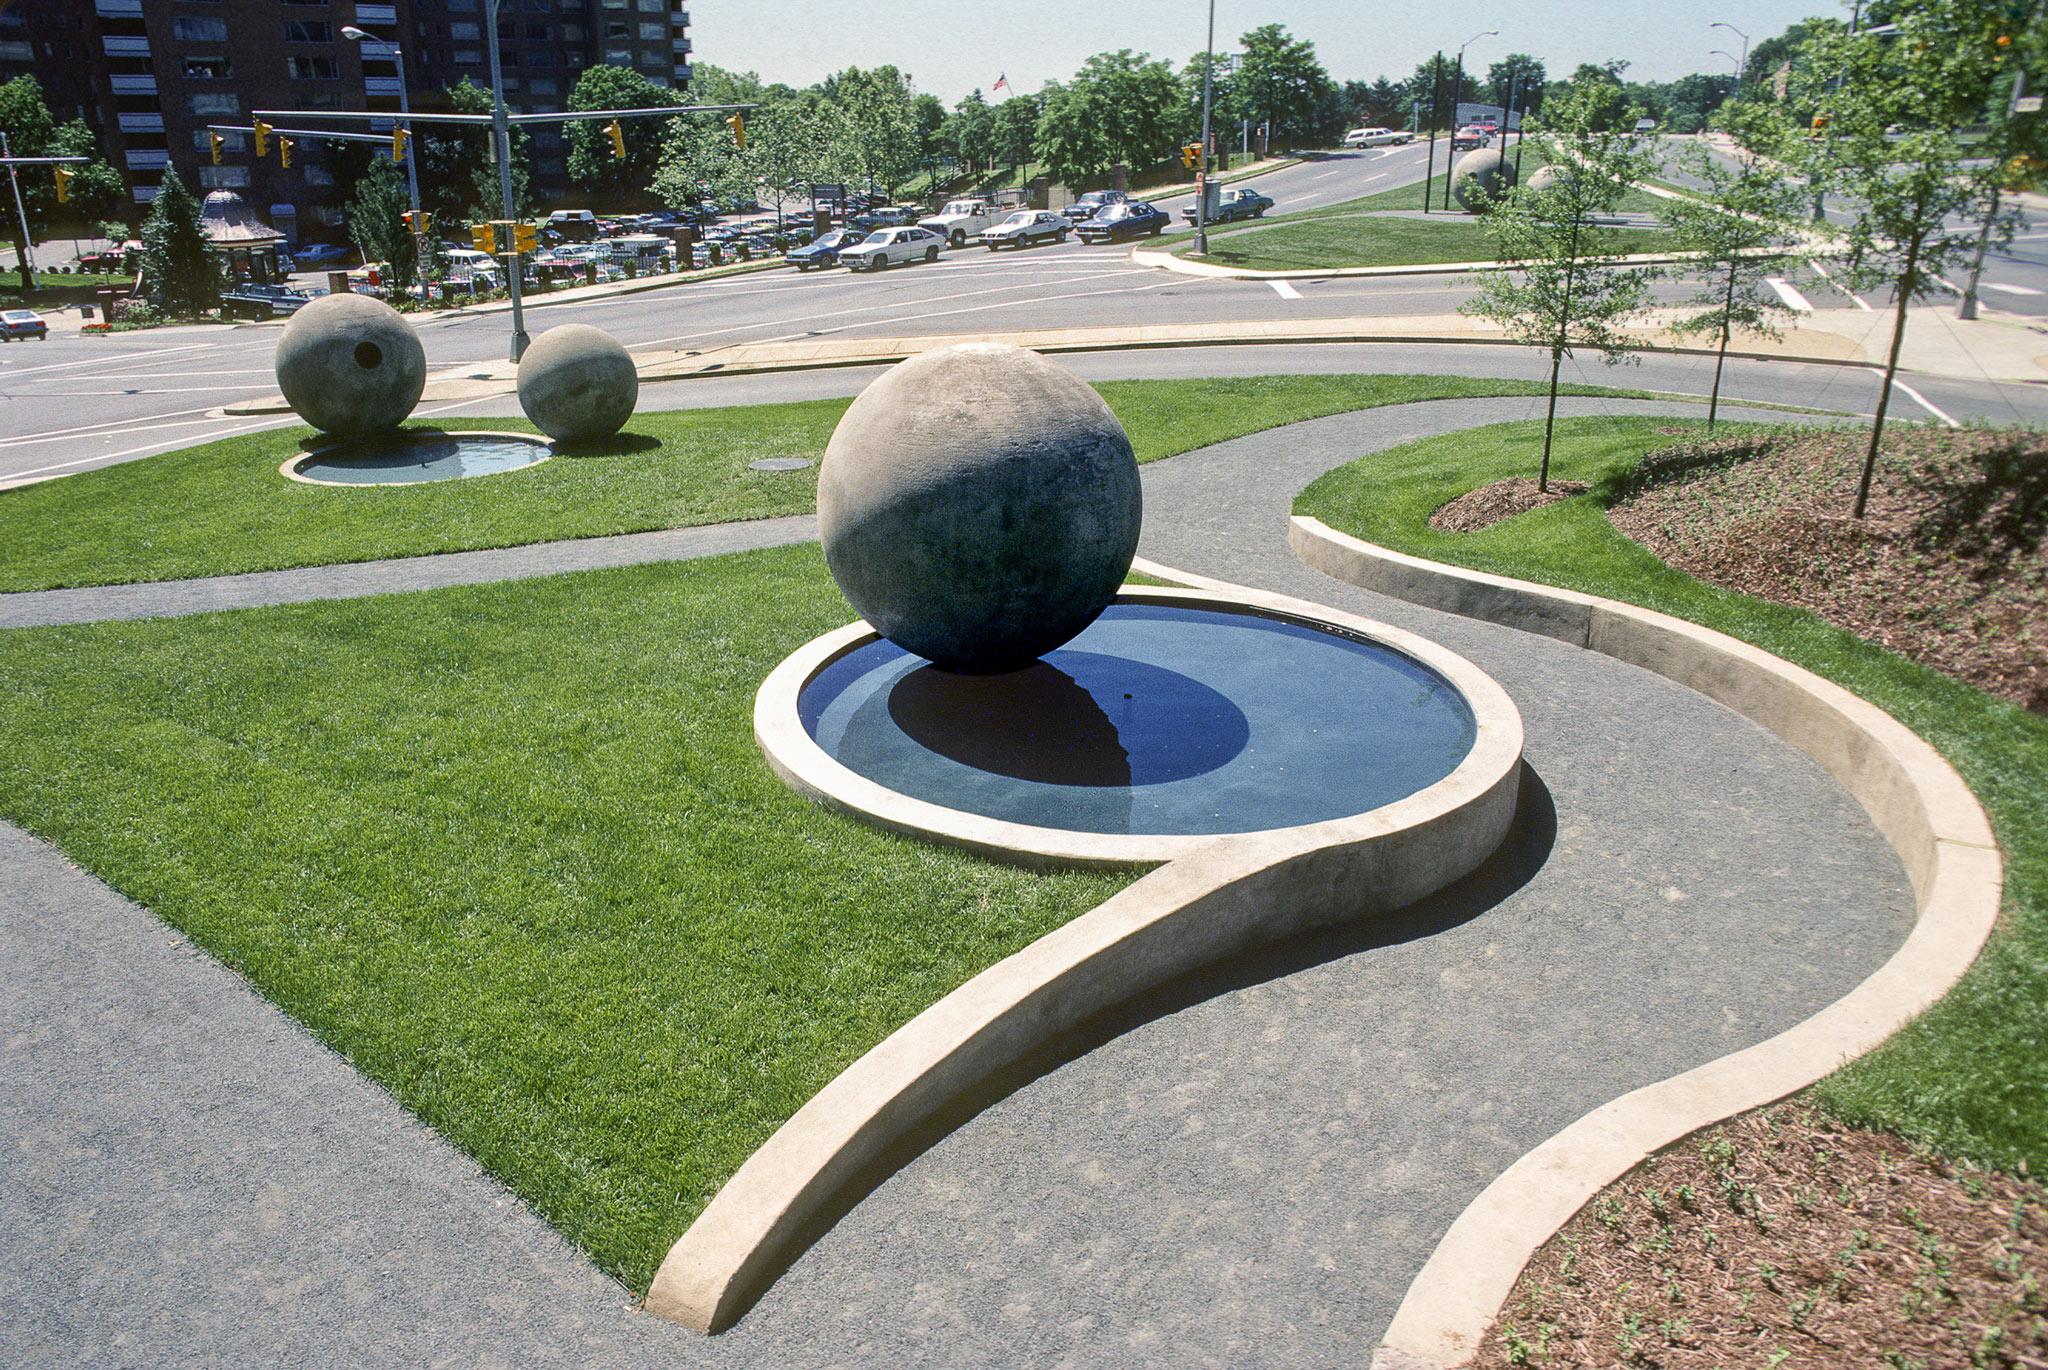 large concrete spheres in a park. One of the spheres rests above a circular pool and a meandering path